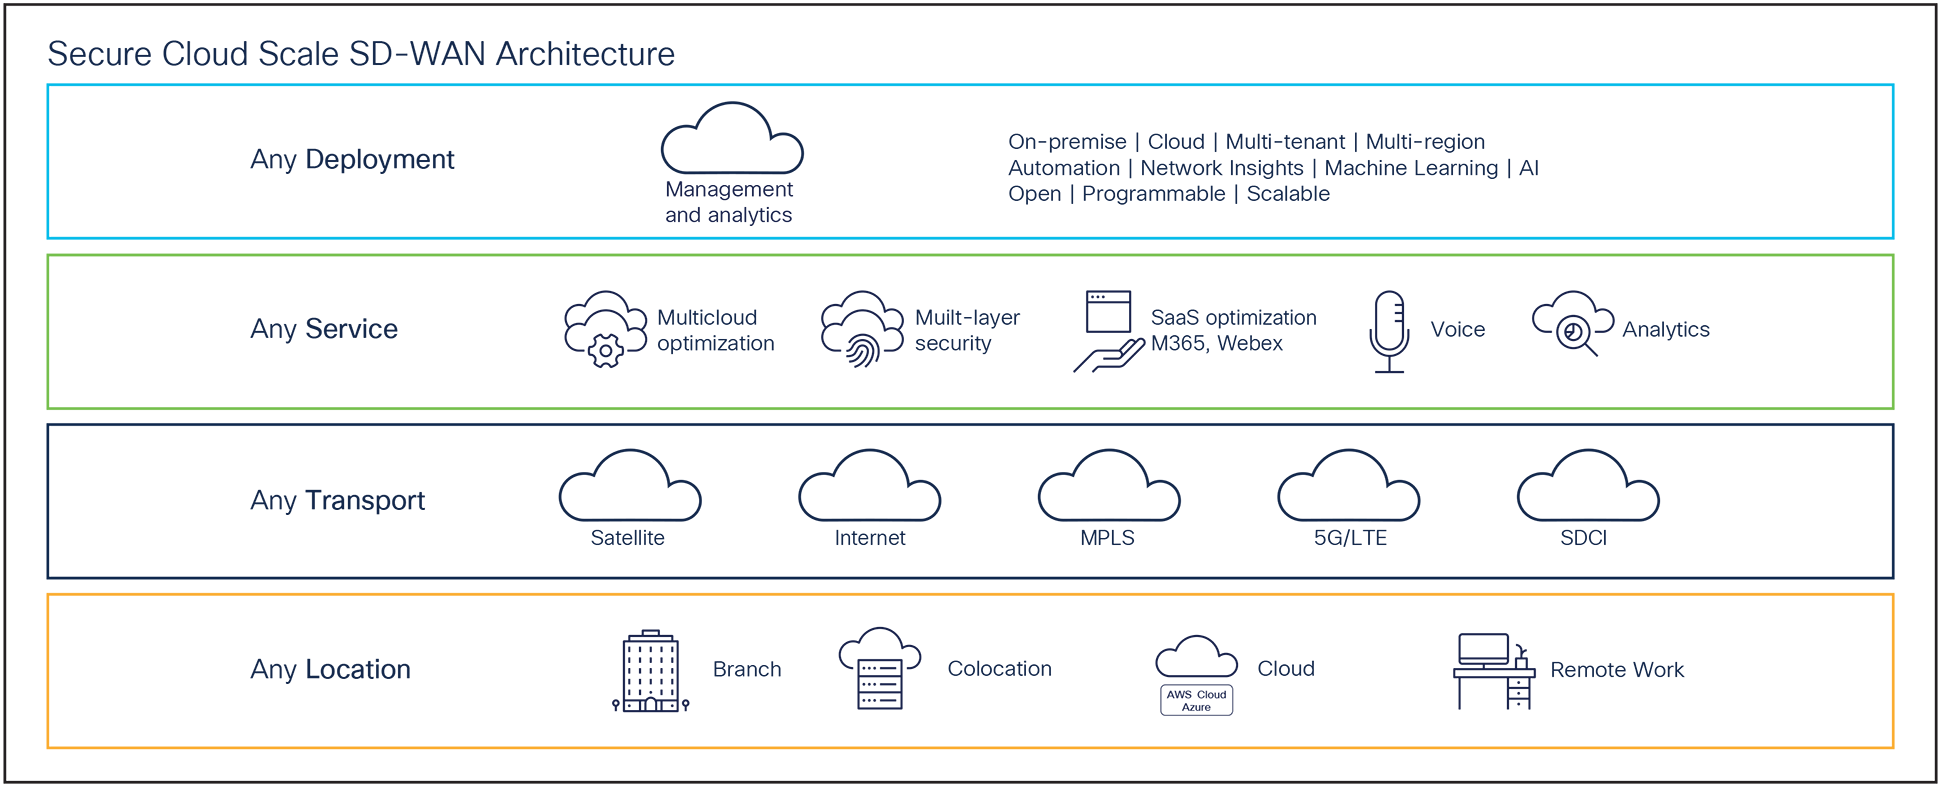 Benefits of the flexible Cisco SD-WAN architecture